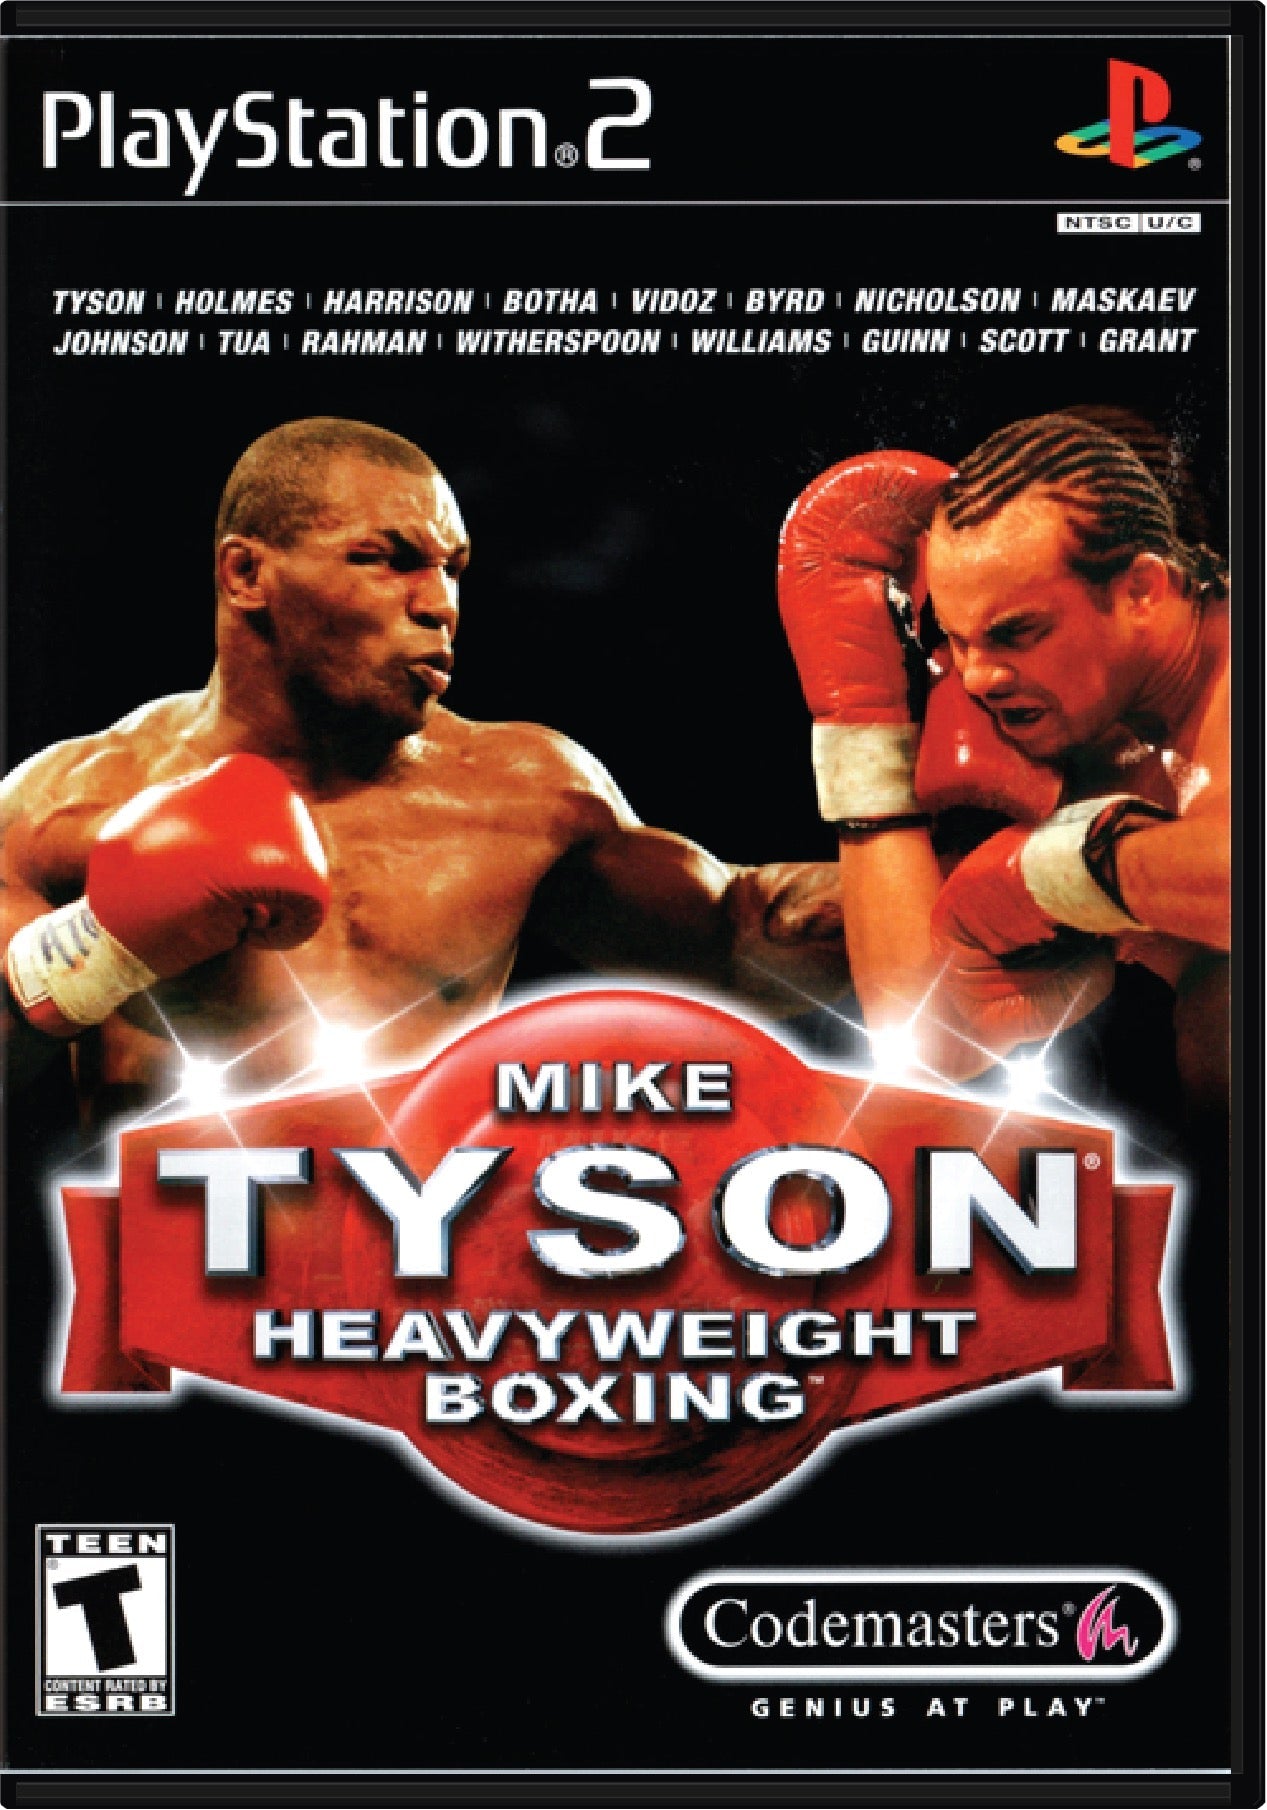 Mike Tyson Boxing Cover Art and Product Photo